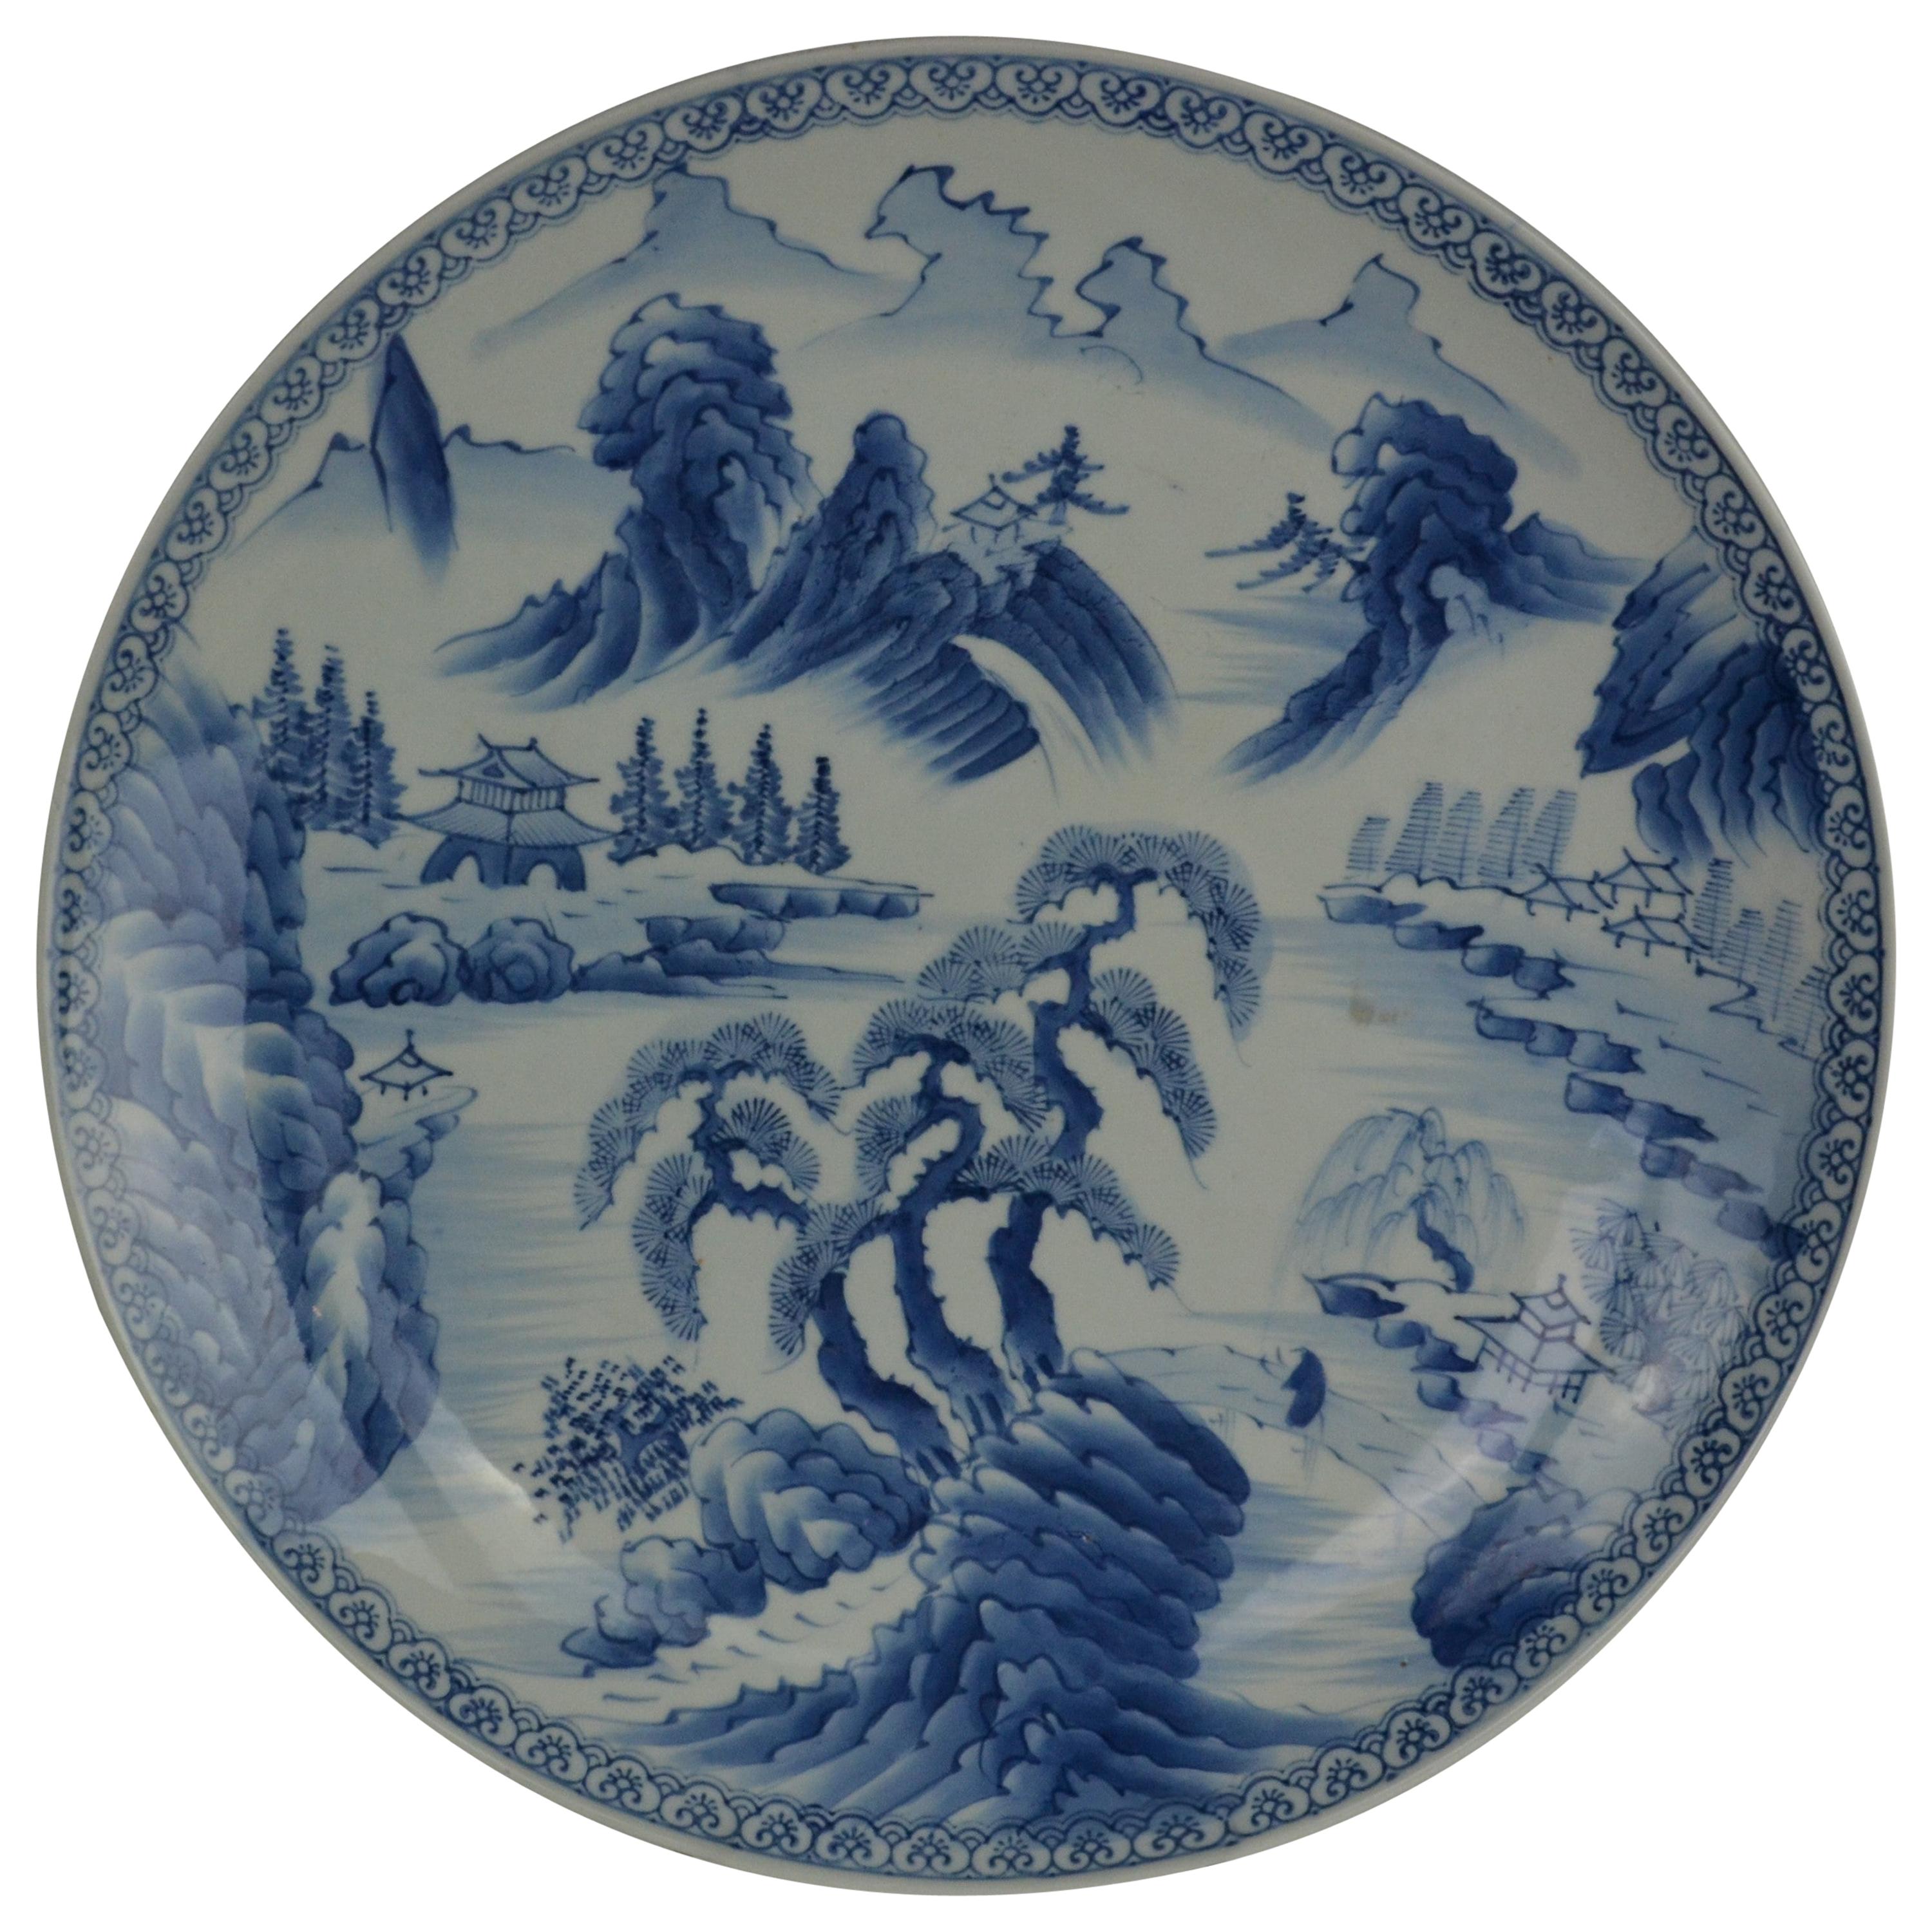 A large blue and white Japanese platter from the late 19th century. Decorated with a landscape scene with trees, hills and homes. Nice blue tint the white ground.